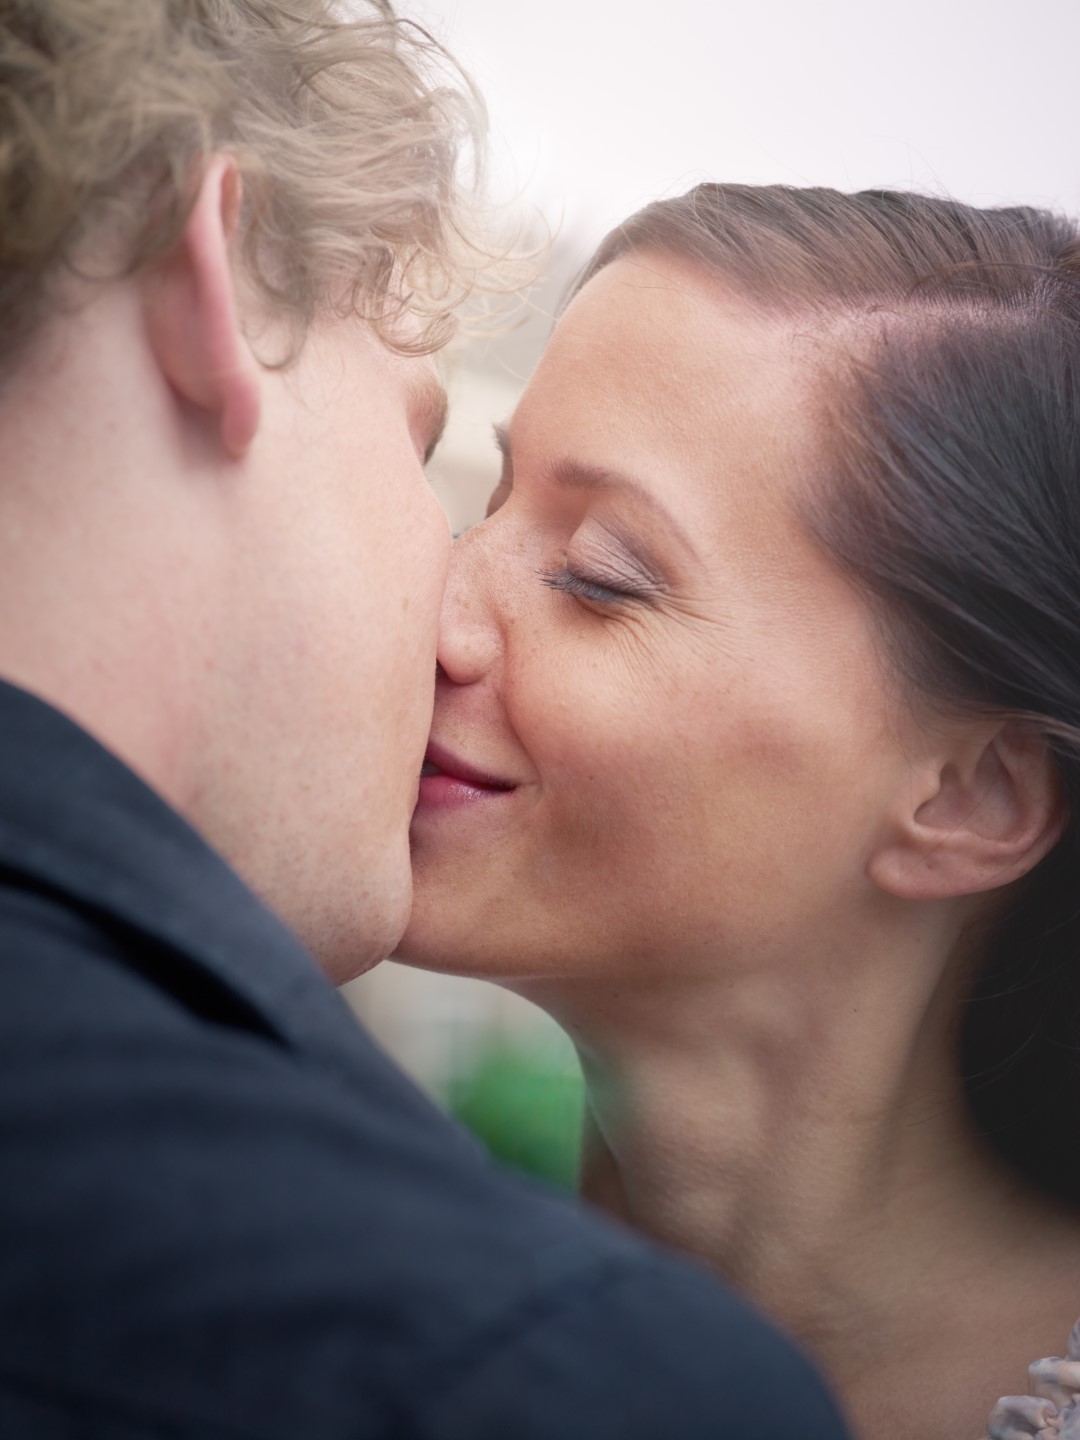 man and woman kissing and smiling during intimacy after a support group